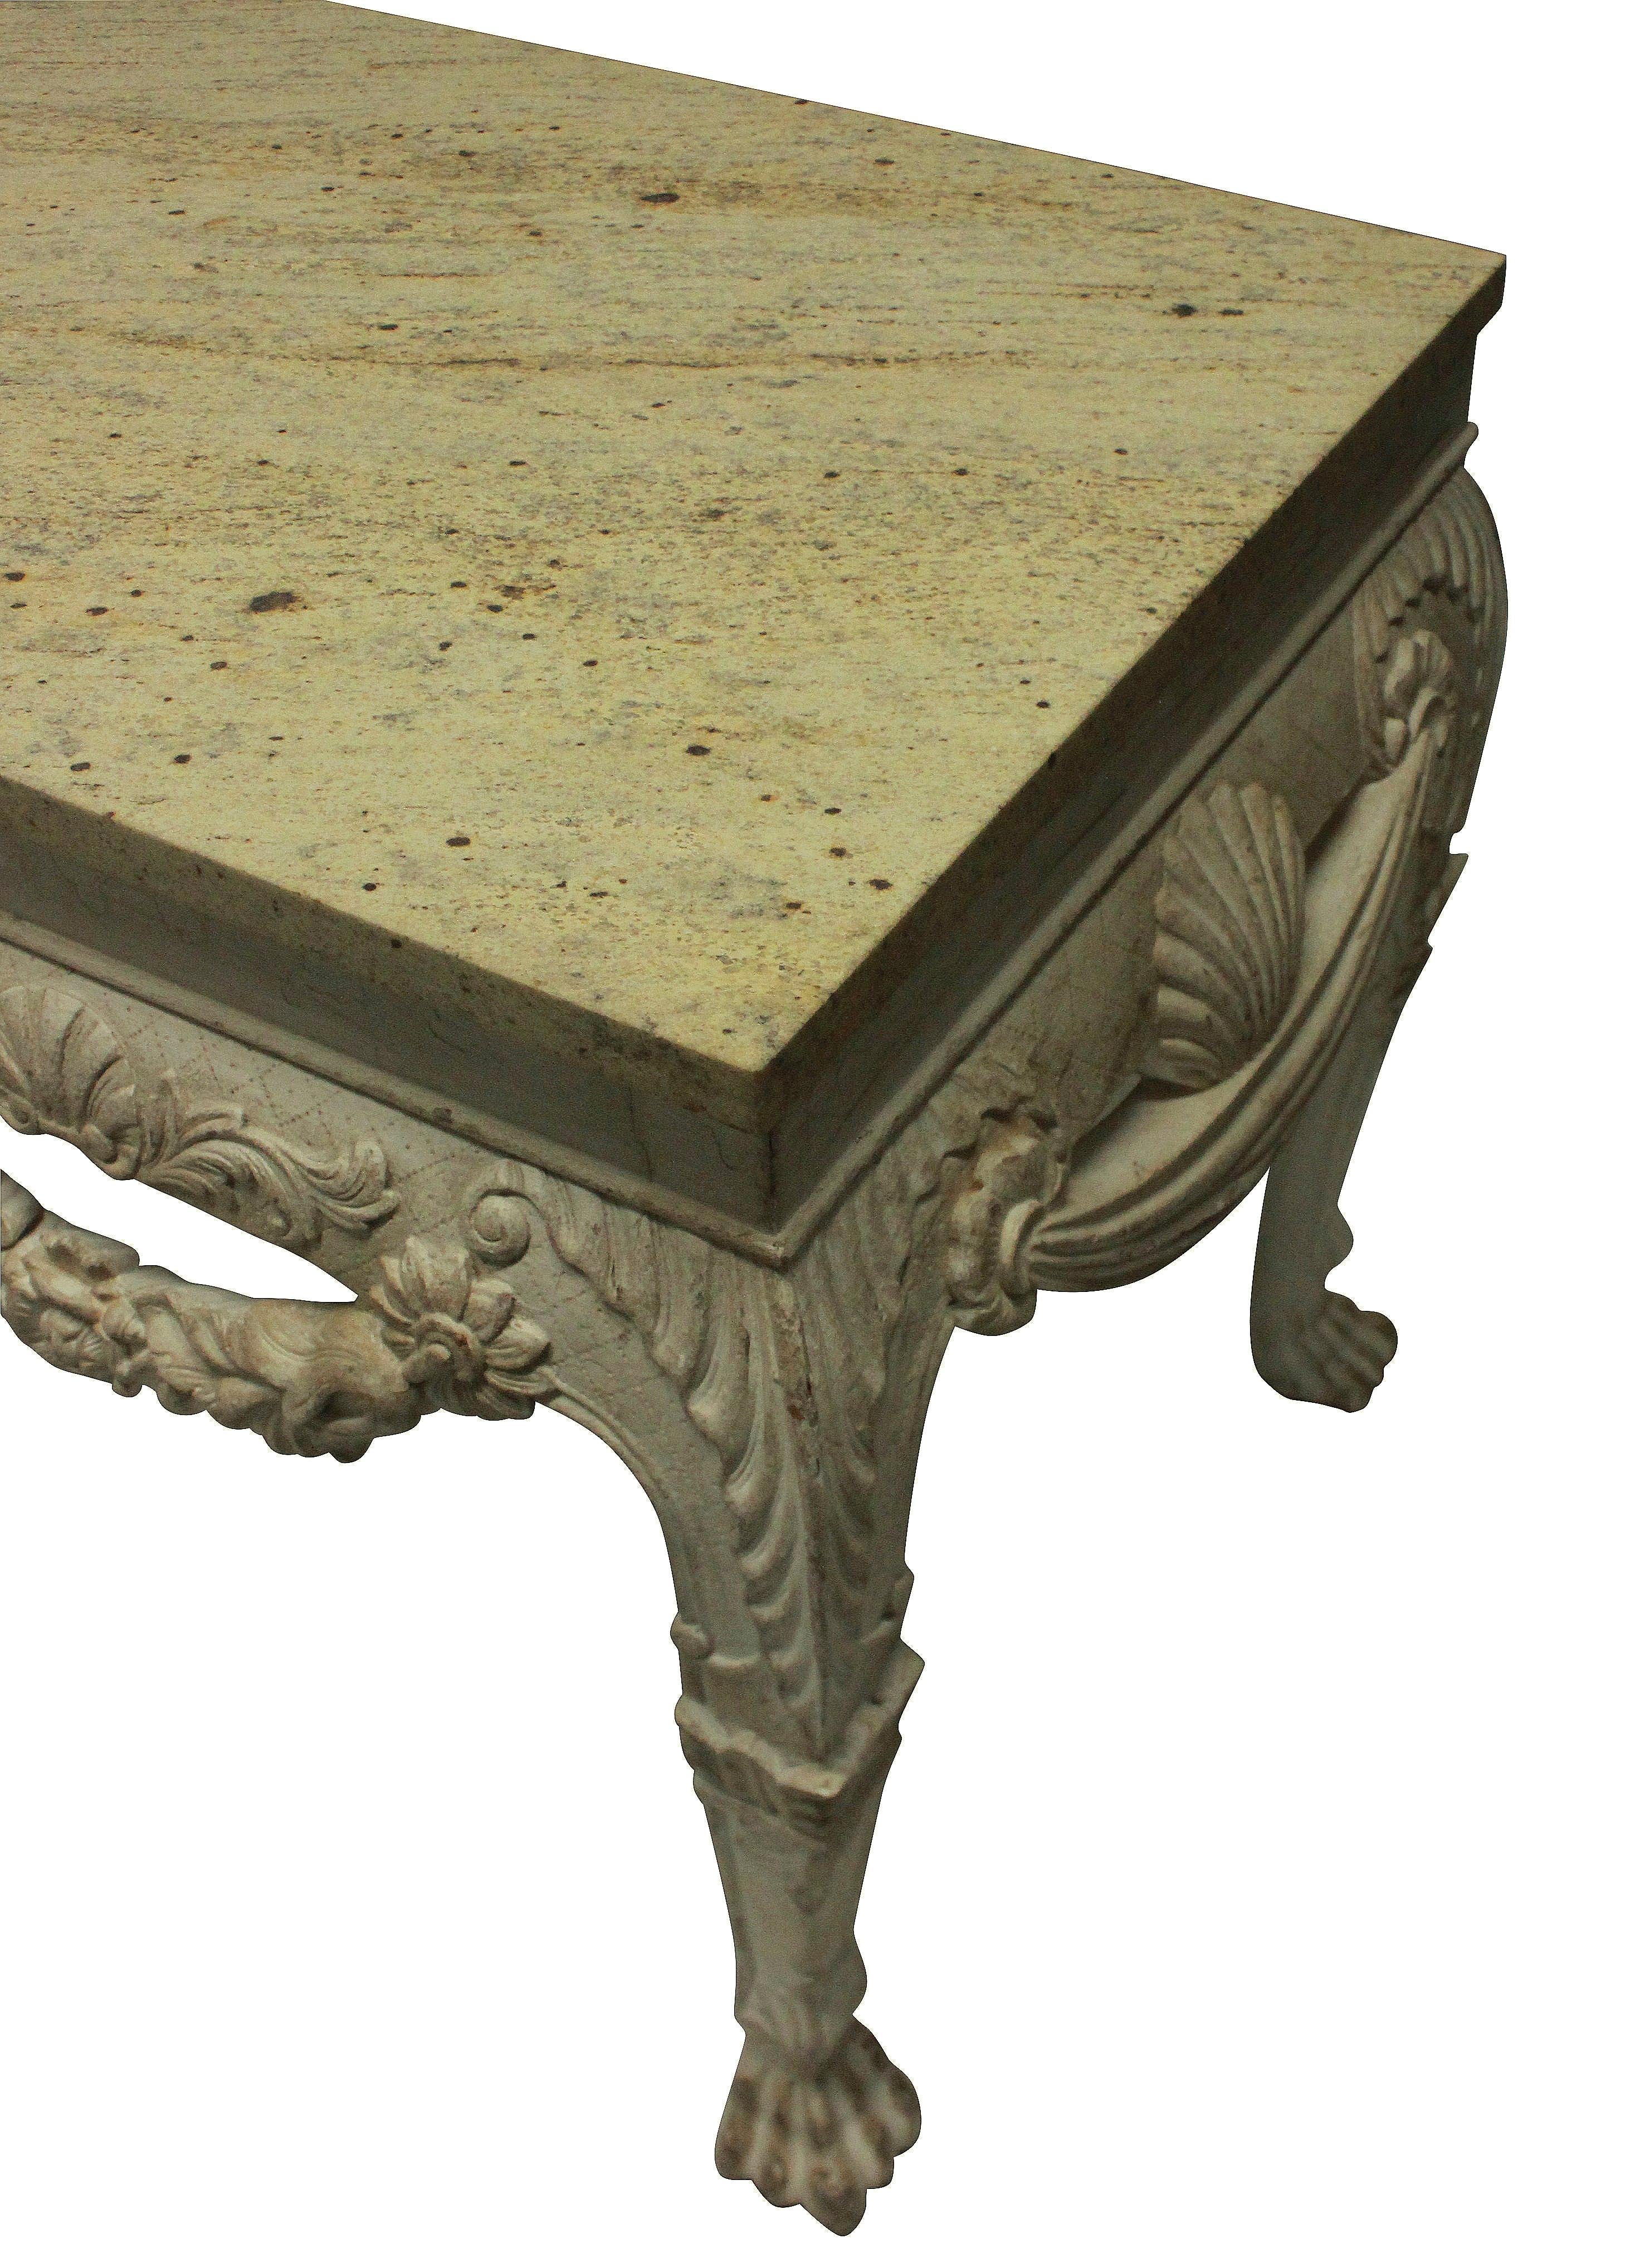 A large pair of English country house console tables in the 18th century manner, with lion masks, swags and acanthus carvings. Distressed painted mahogany with stone colored marble tops.

 